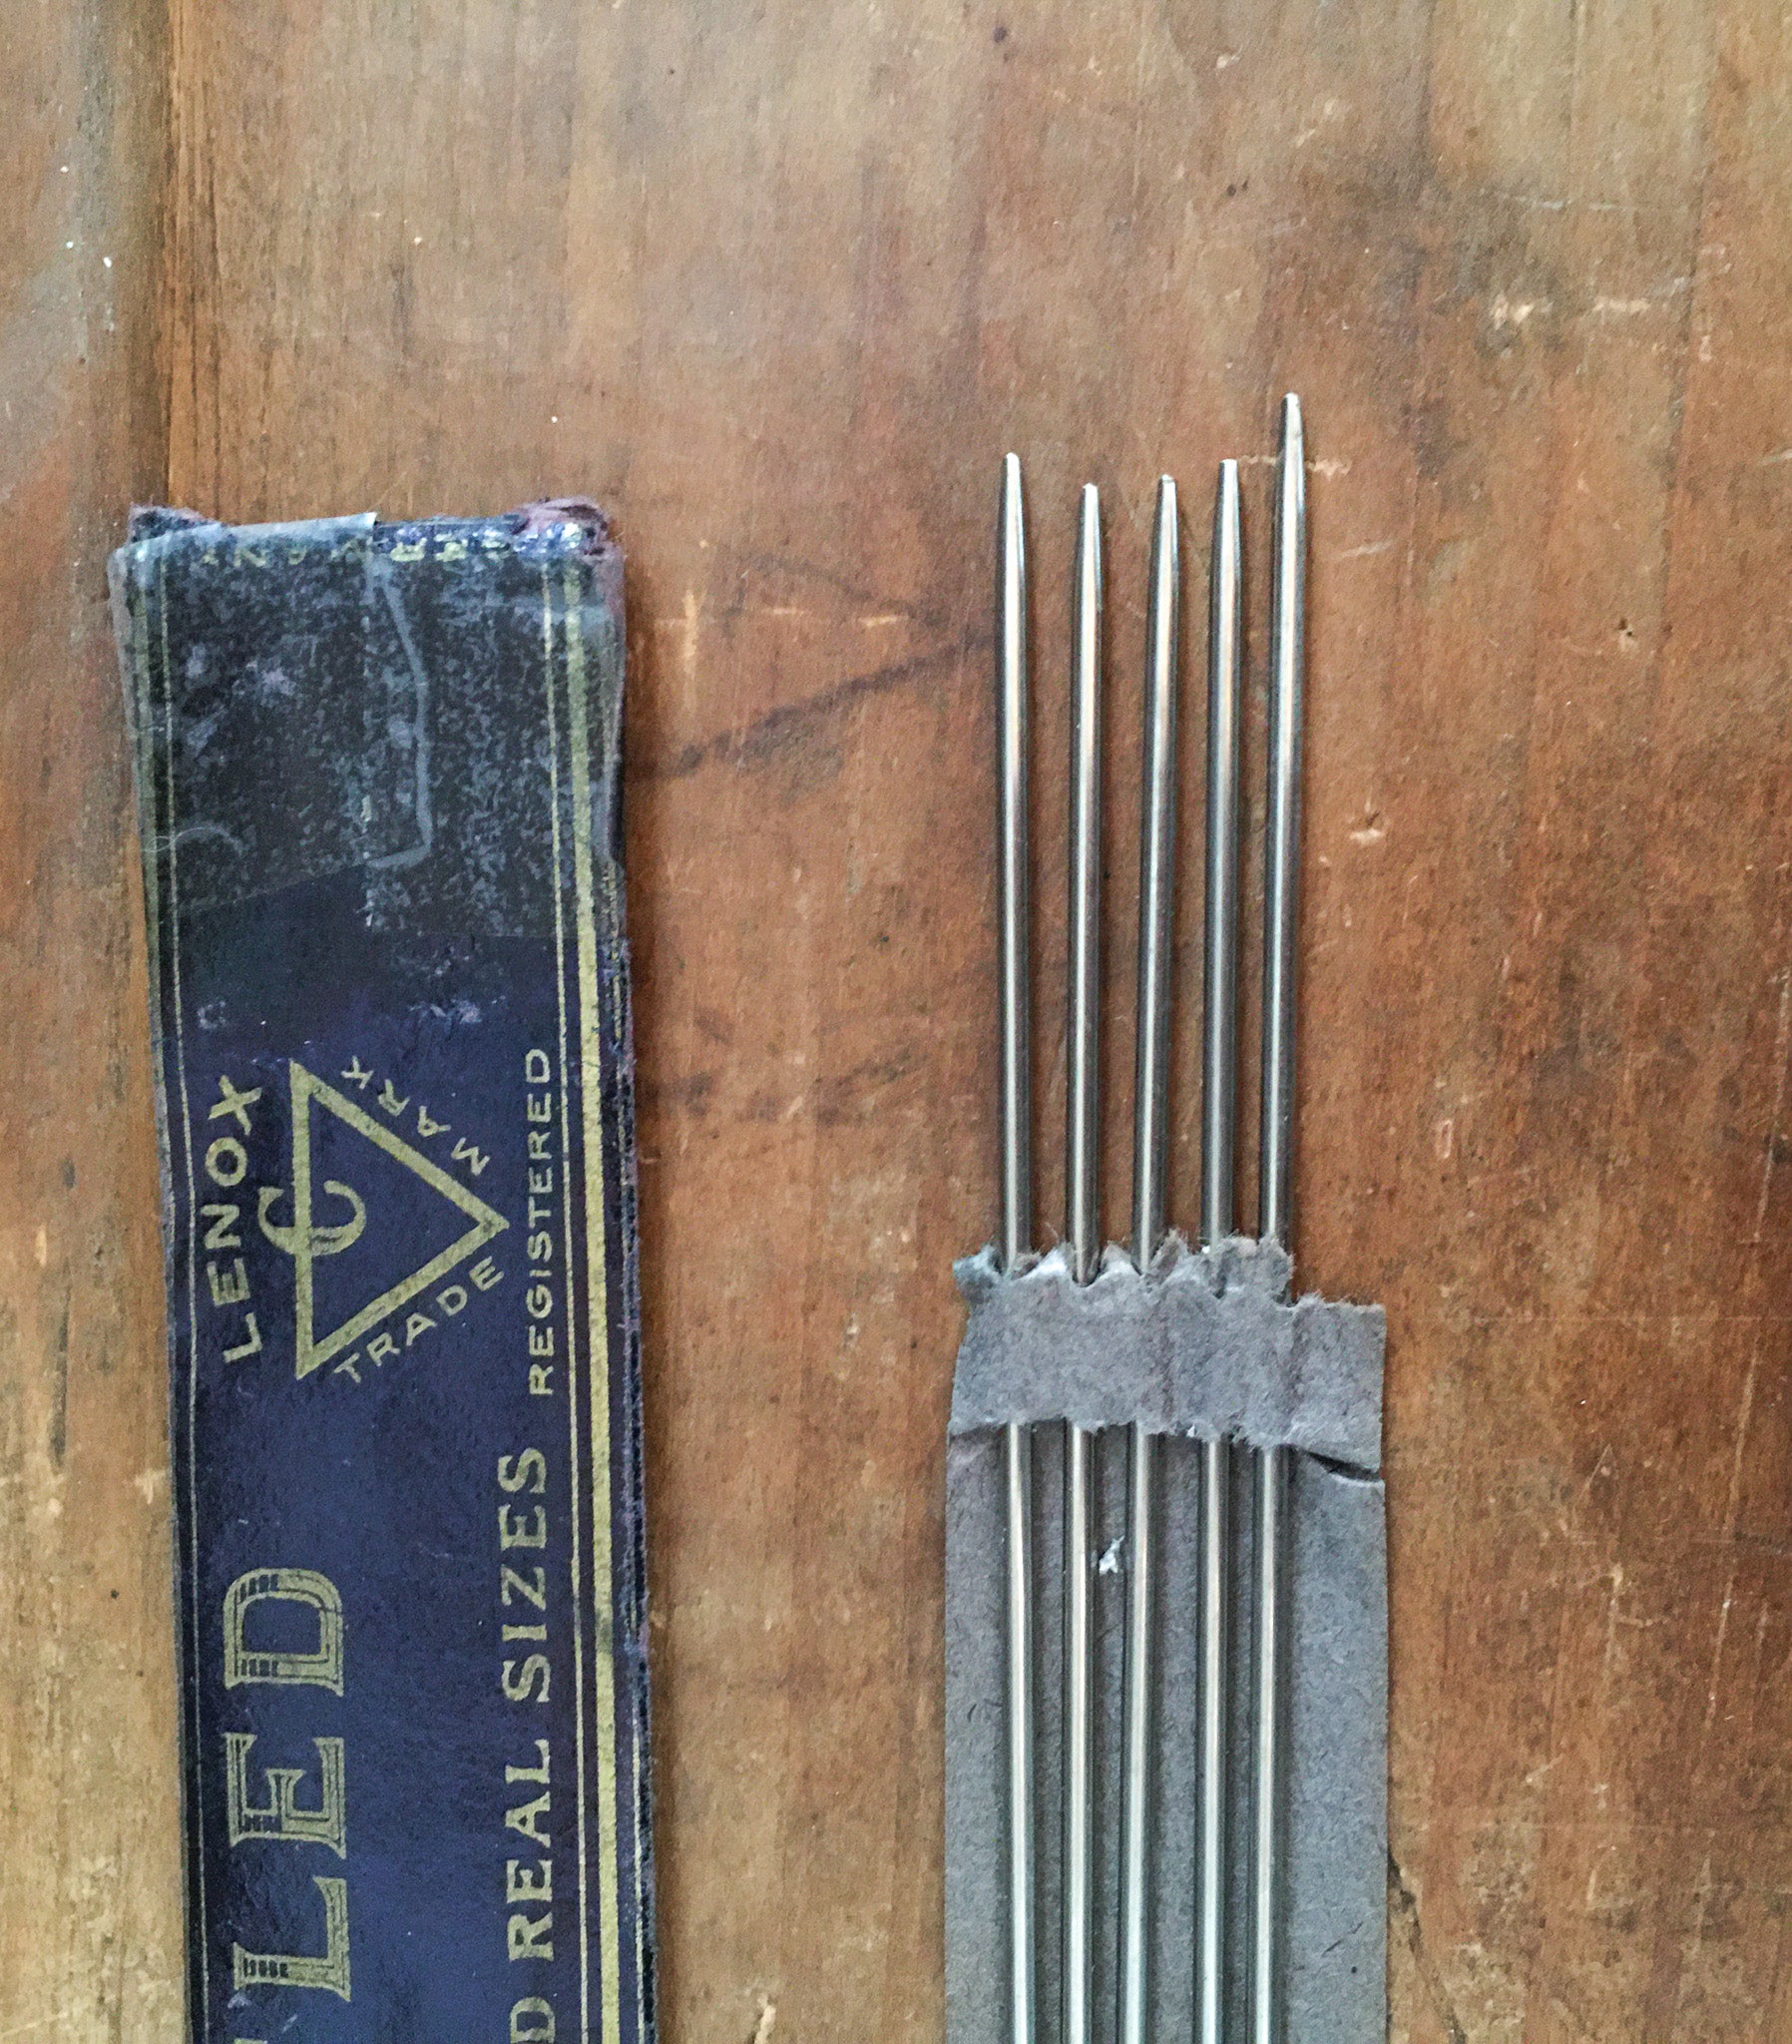 2 Packages, 1920's - 1930's Lenox Nickeled Knitting Pins and Boye Knitting Pins